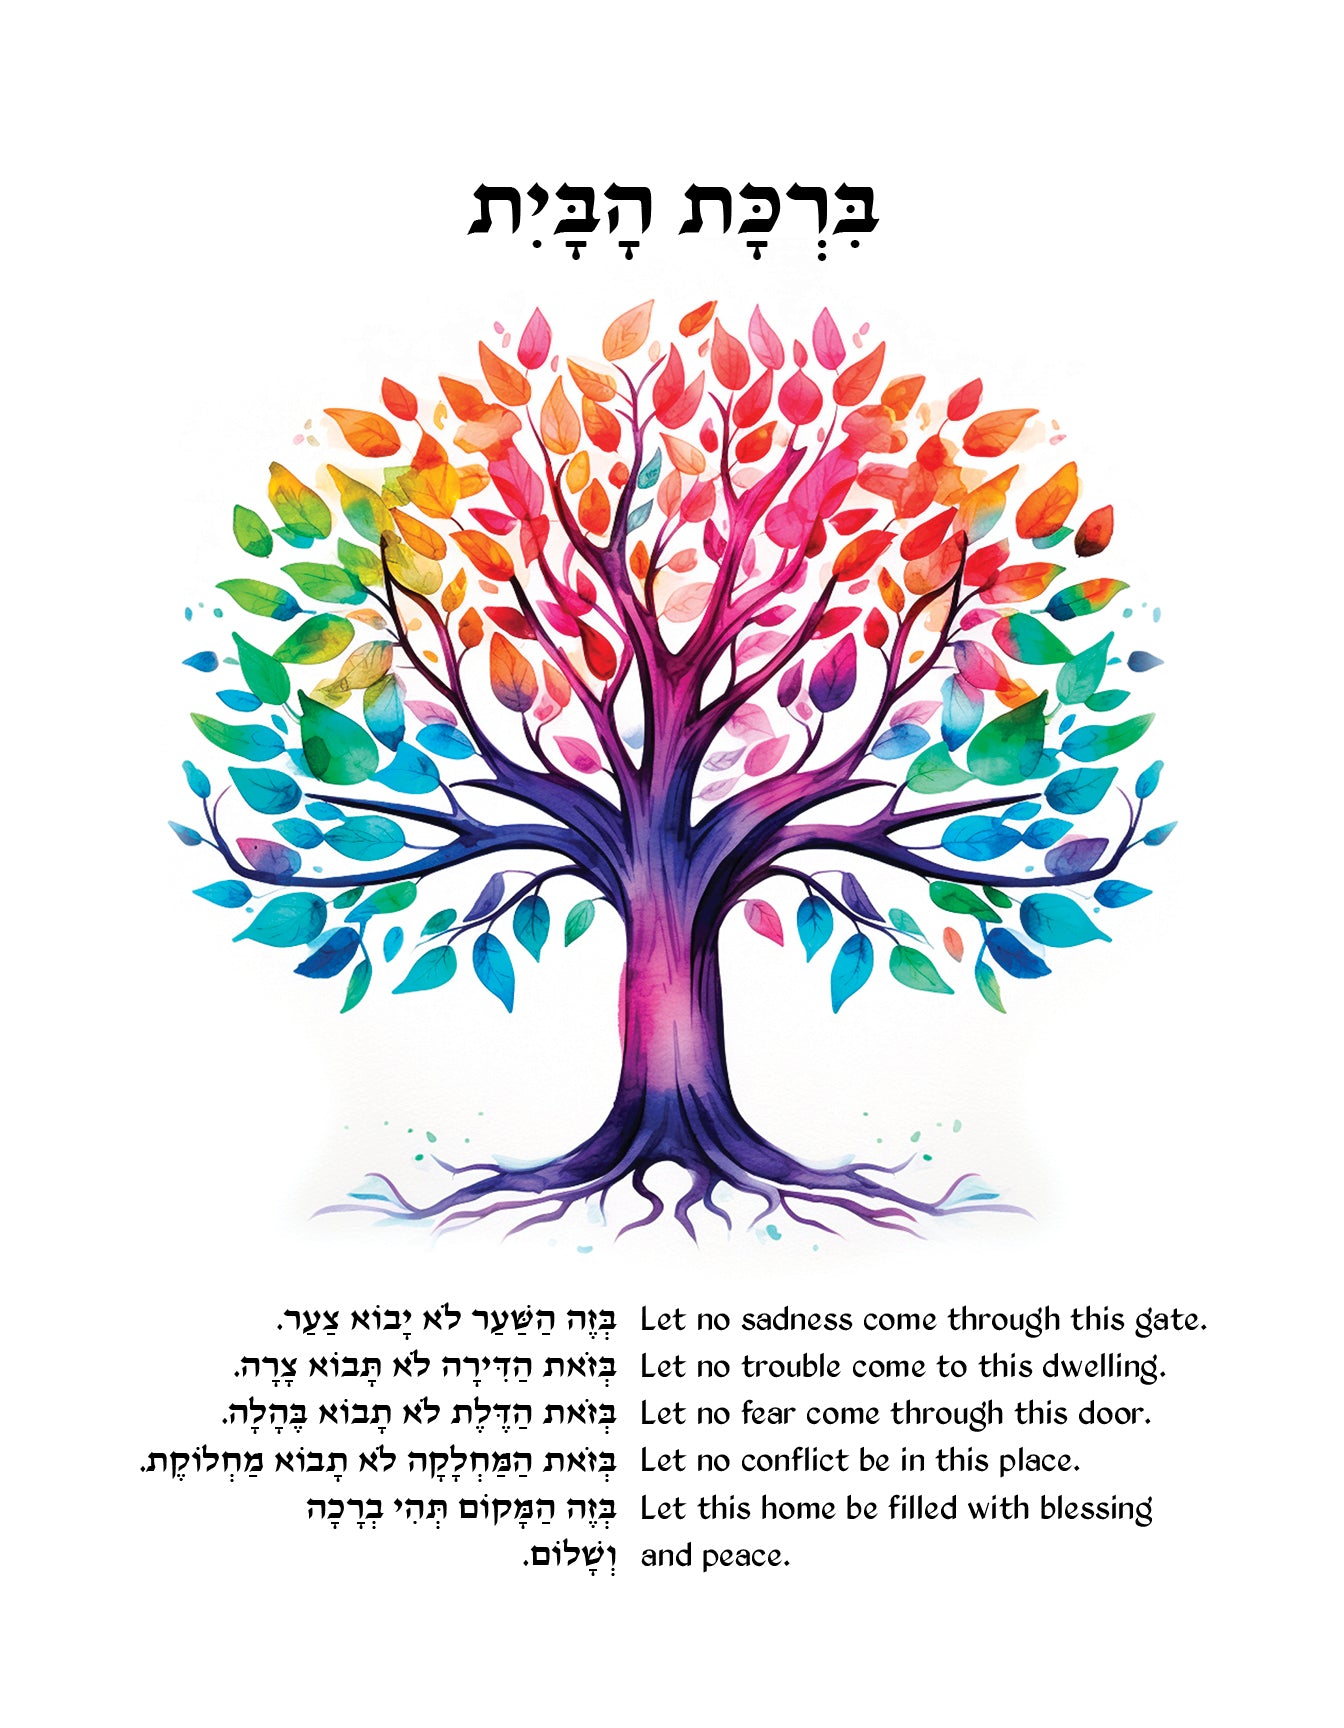 Multicolored Tree - Jewish Home Blessing